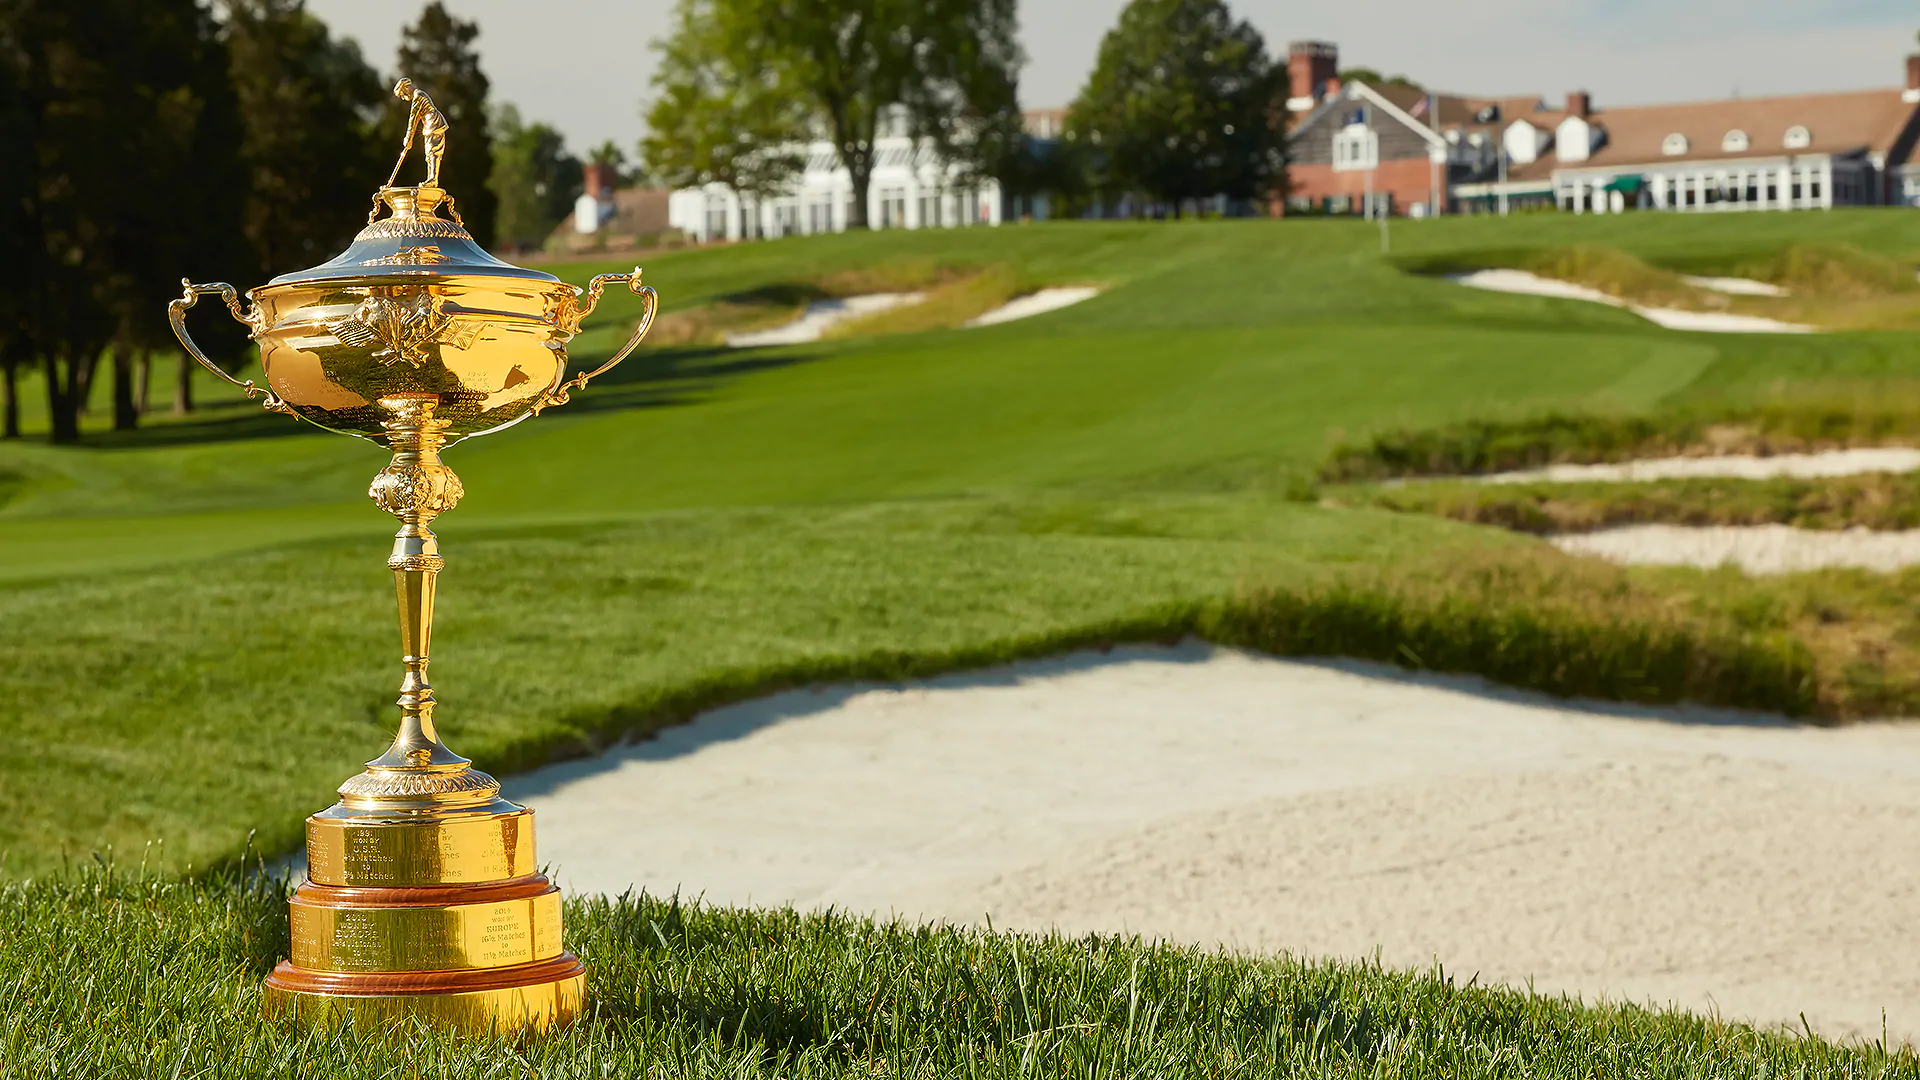 Ryder Cup 101: A guide to this week's matches